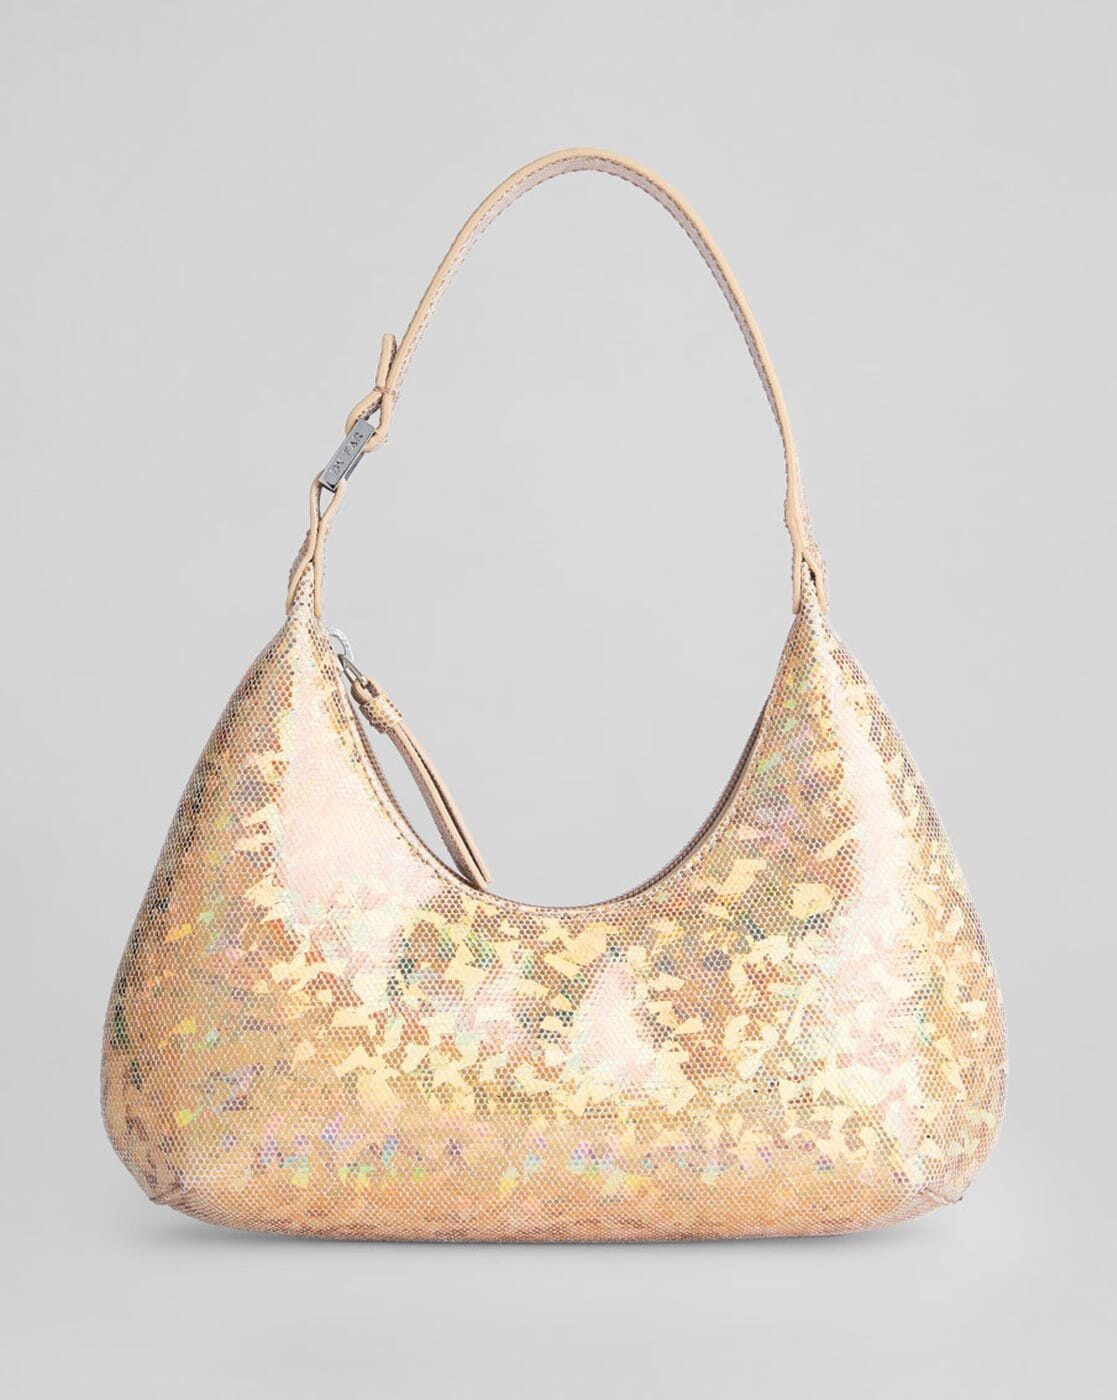 Y2K SEQUIN BAG- this purse is slouchy and sparkly 💜... - Depop